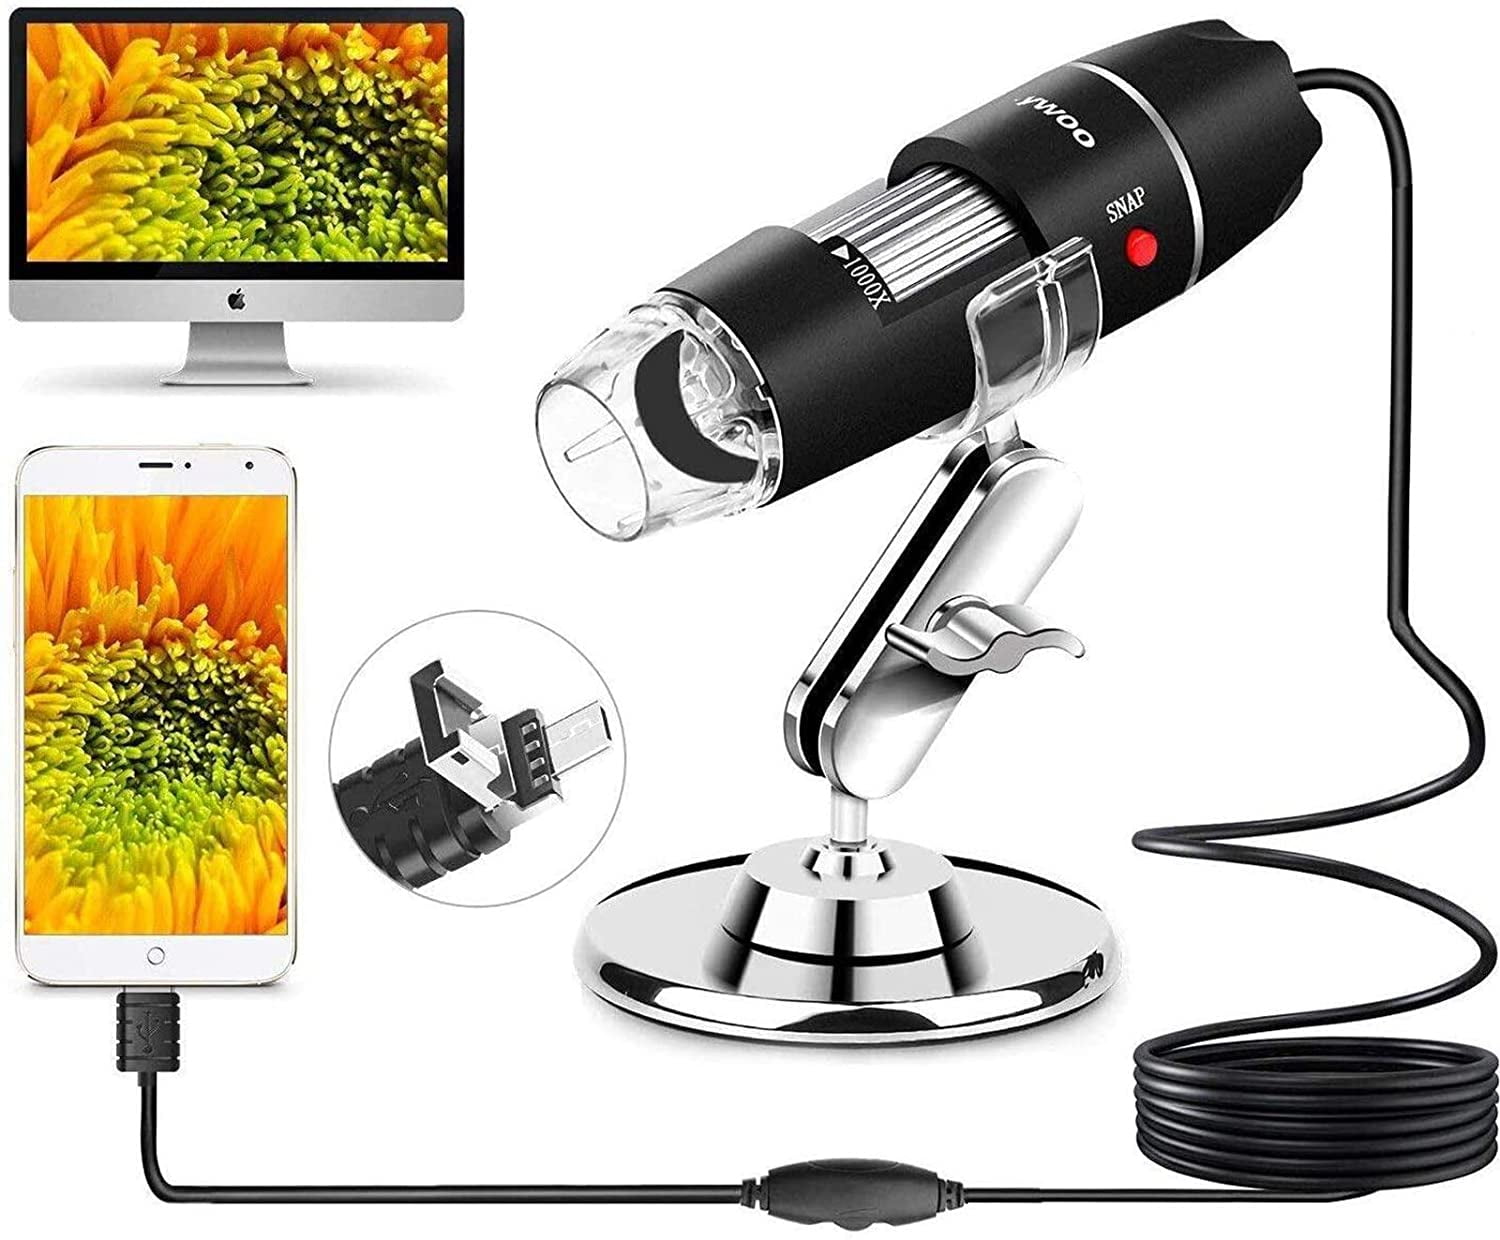 with OTG Adapter and Metal Stand,Compatible with Mac Window 7/8/10 Android Linux,Handheld USB Phone Microscope 8 LED Magnification microscope Camera USB Digital Microscope 50X to 1600X 